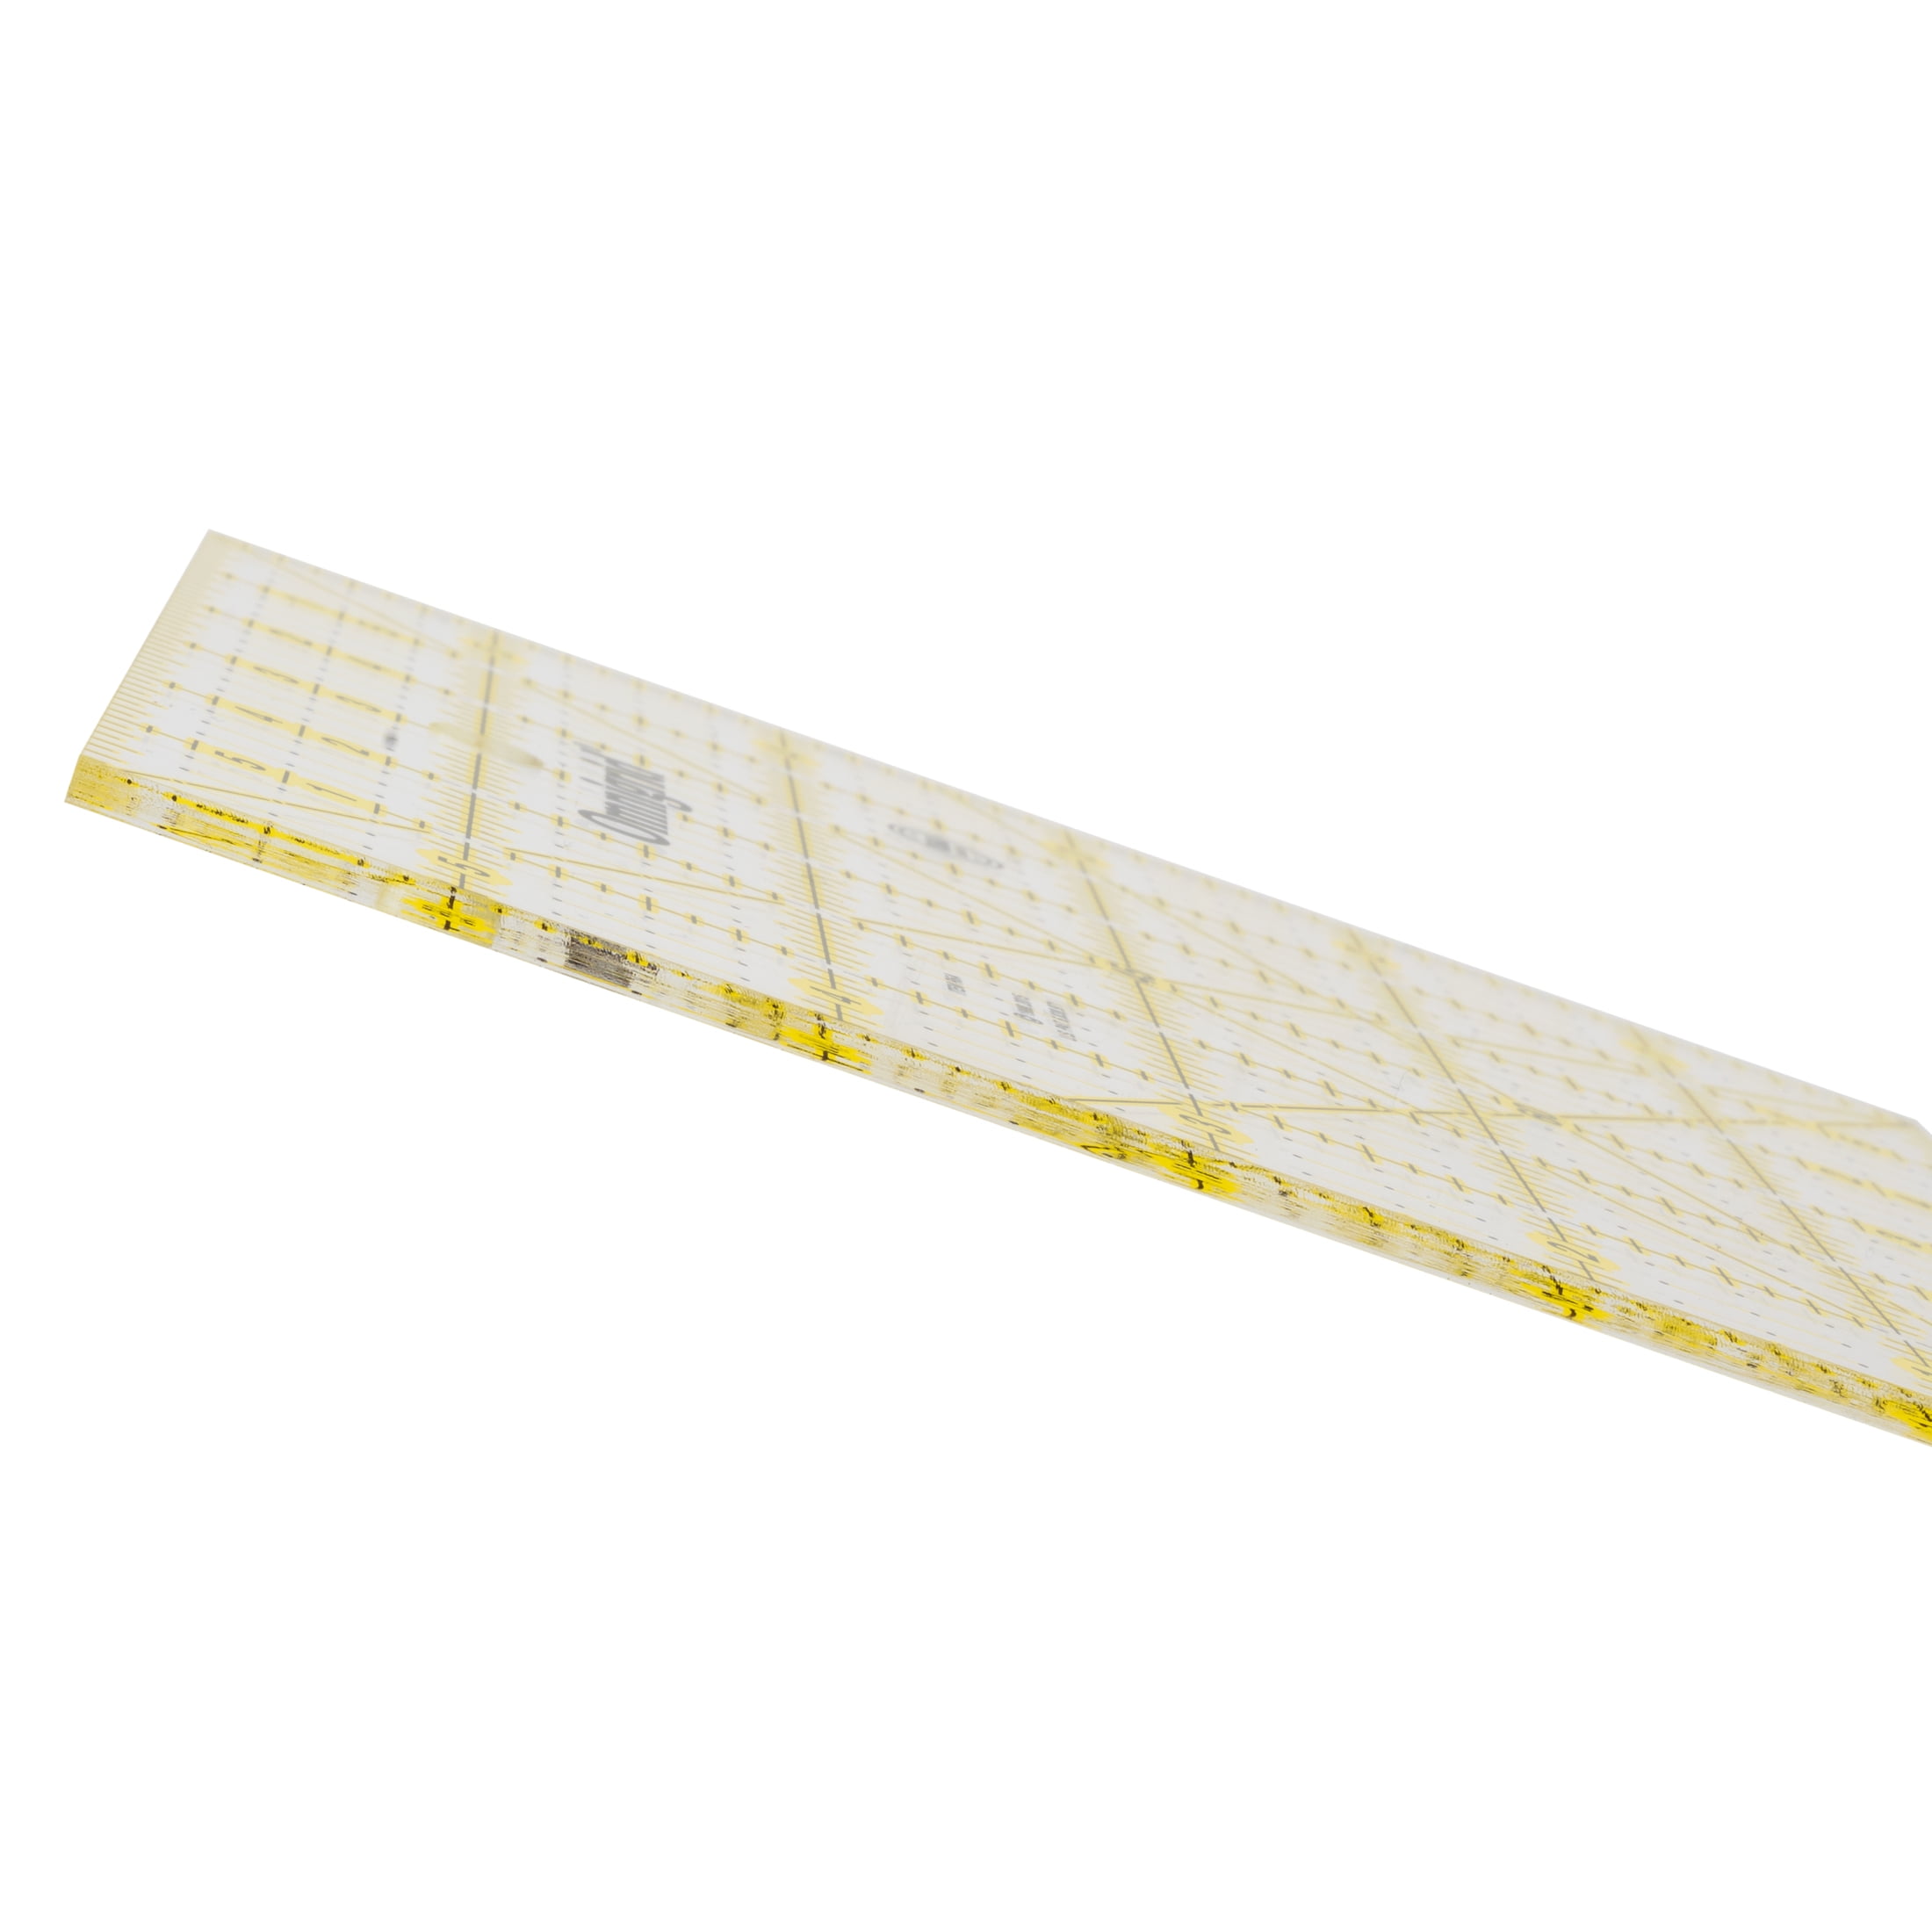 Shop the Large Capacity of Omnigrid Ruler Value Pack (4, 6, 1x6) at  Handicraft Store Online